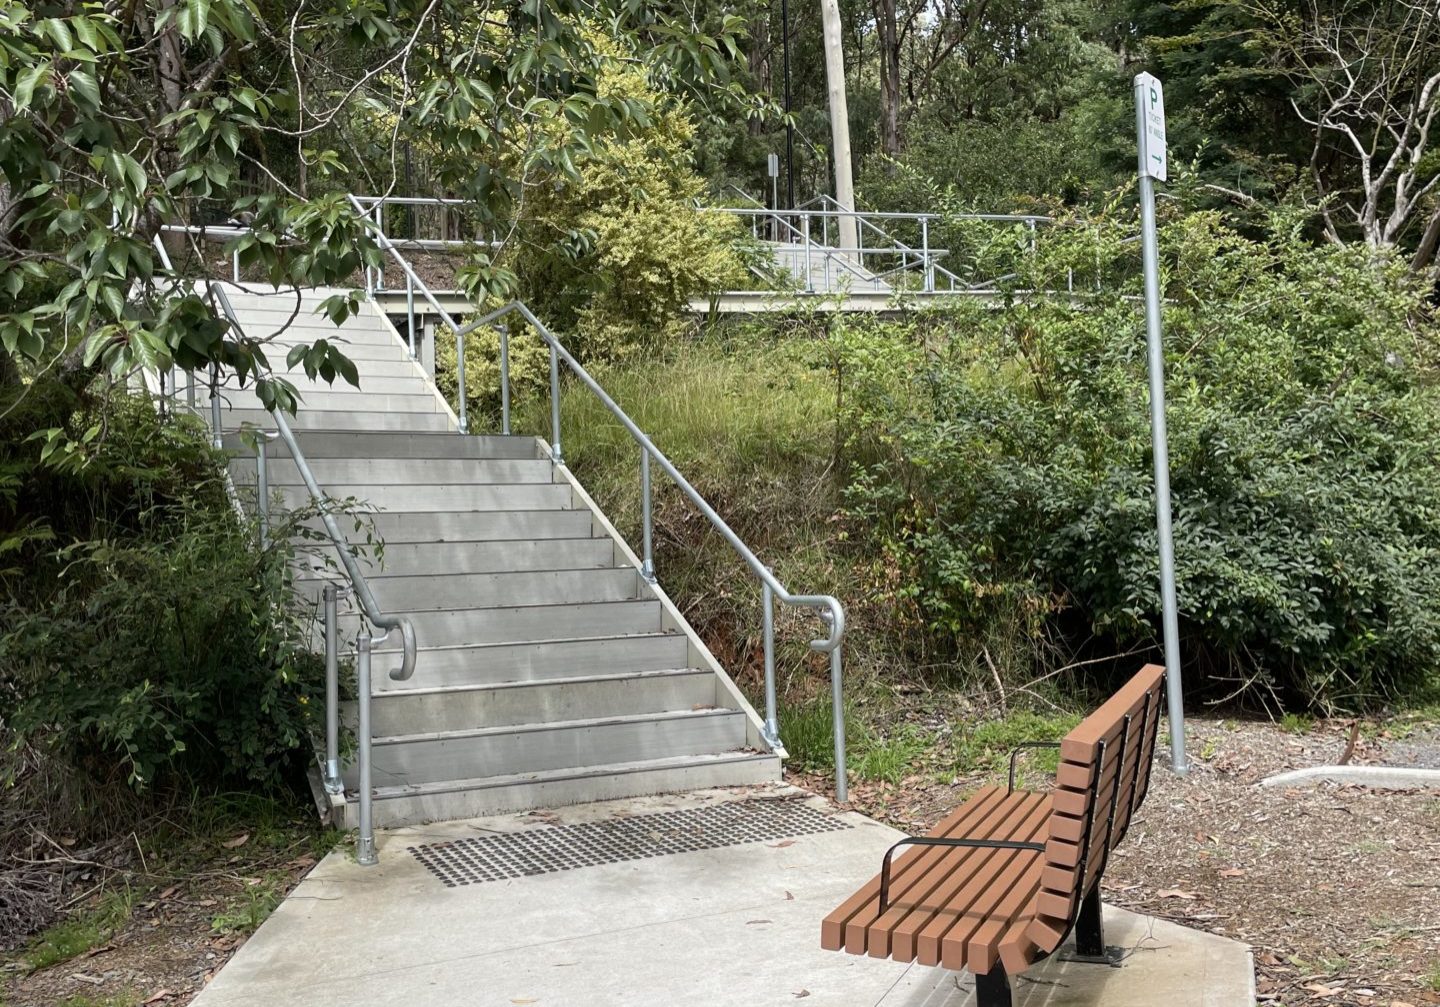 Concrete Steps From Top Lakeside Car Park. The steps has handrails and there is a wooden bench at the bottom of the steps. A concrete path continues on.